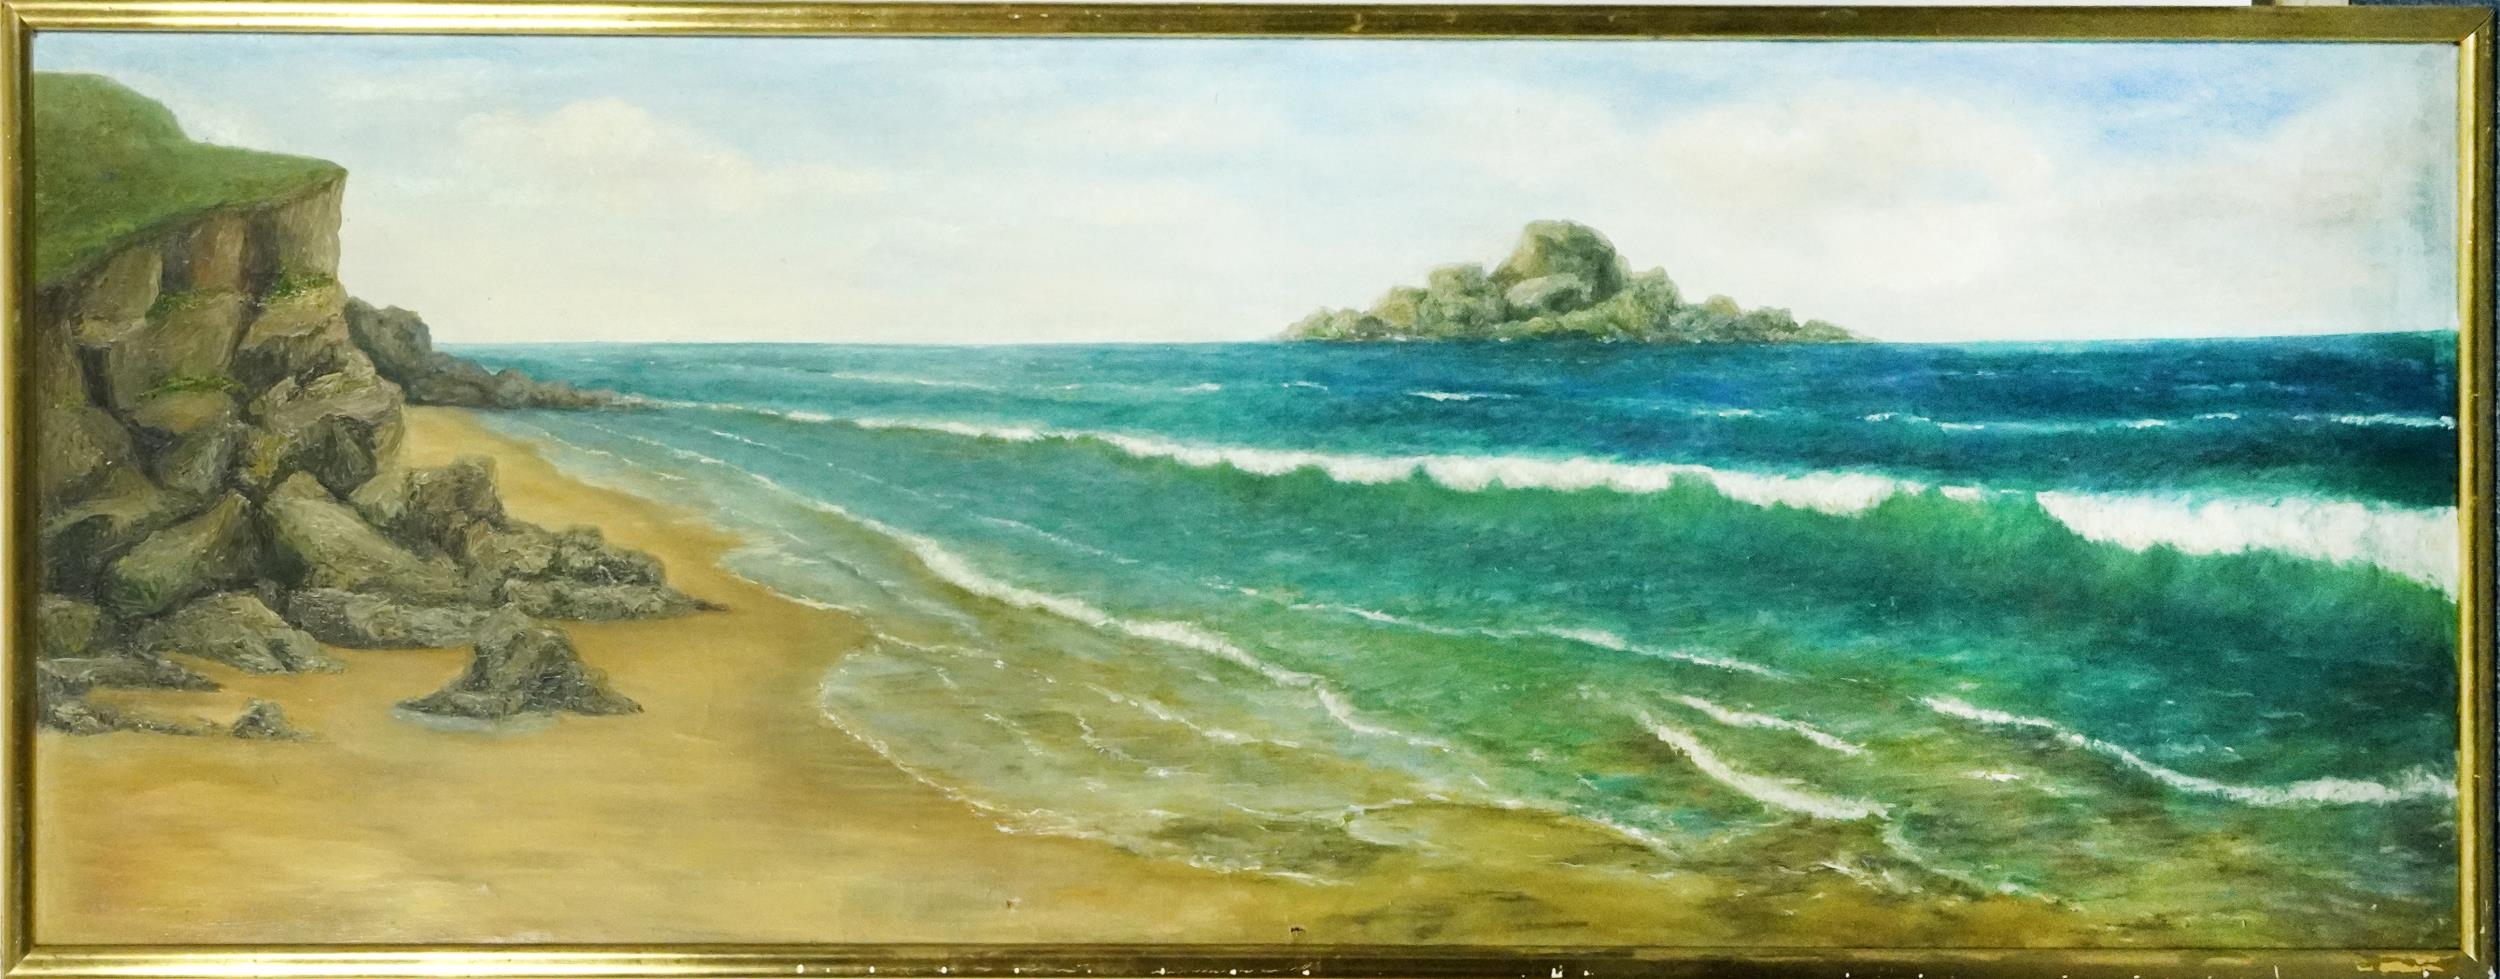 Panoramic coastal scene, early 20th century oil on canvas, framed, 167cm x 60.5cm excluding the - Image 2 of 3